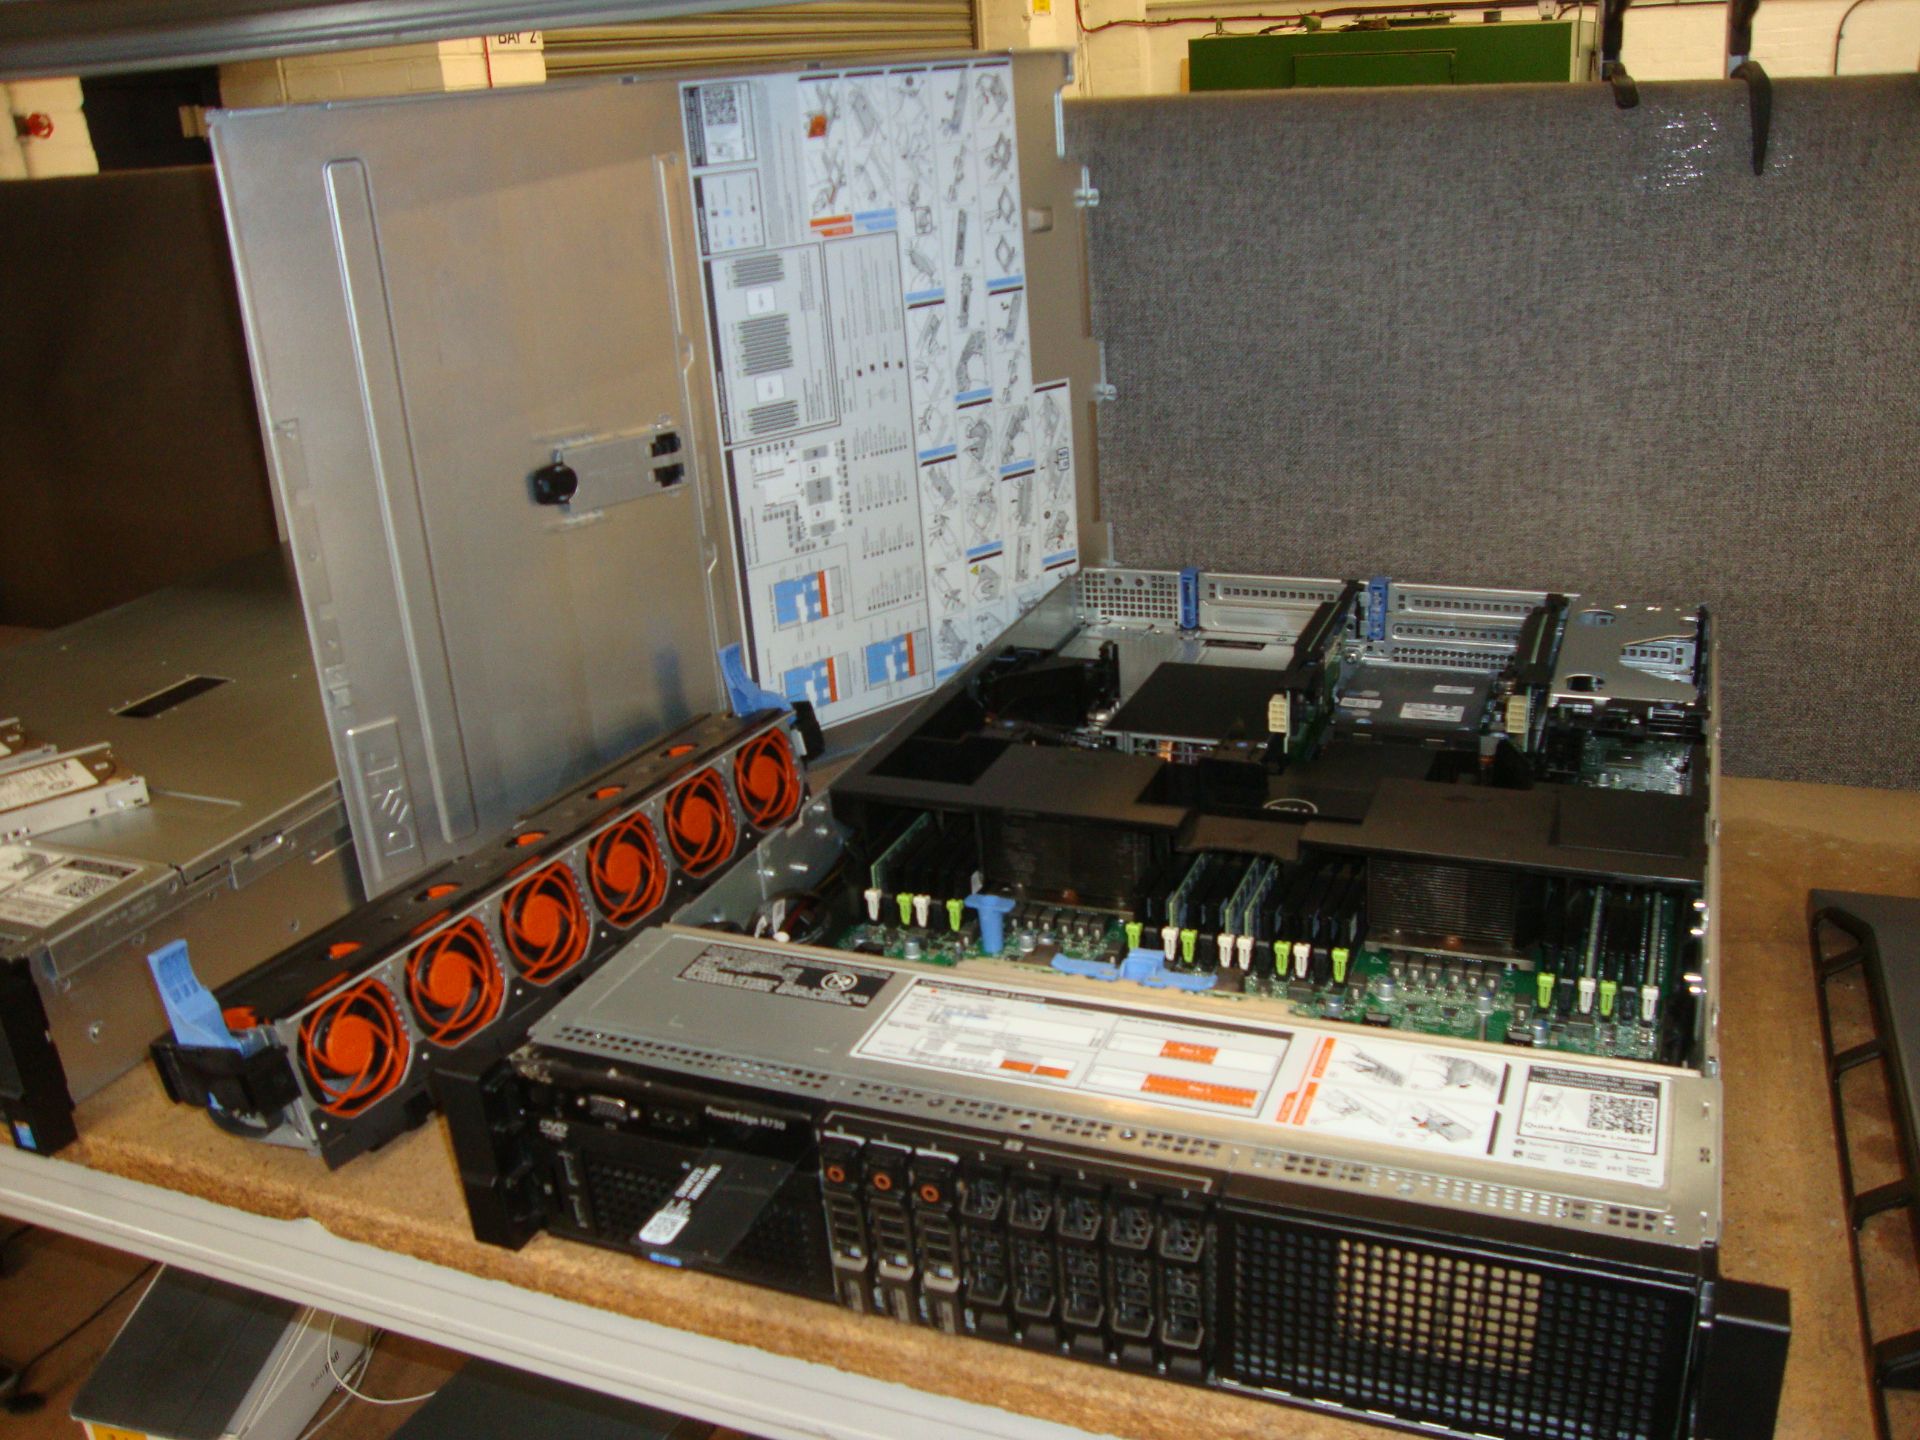 Dell PowerEdge model R730 server with twin Xeon 6 Core E5-2609 V3 1.9 GHz processors, 96Gb RAM, - Image 11 of 13